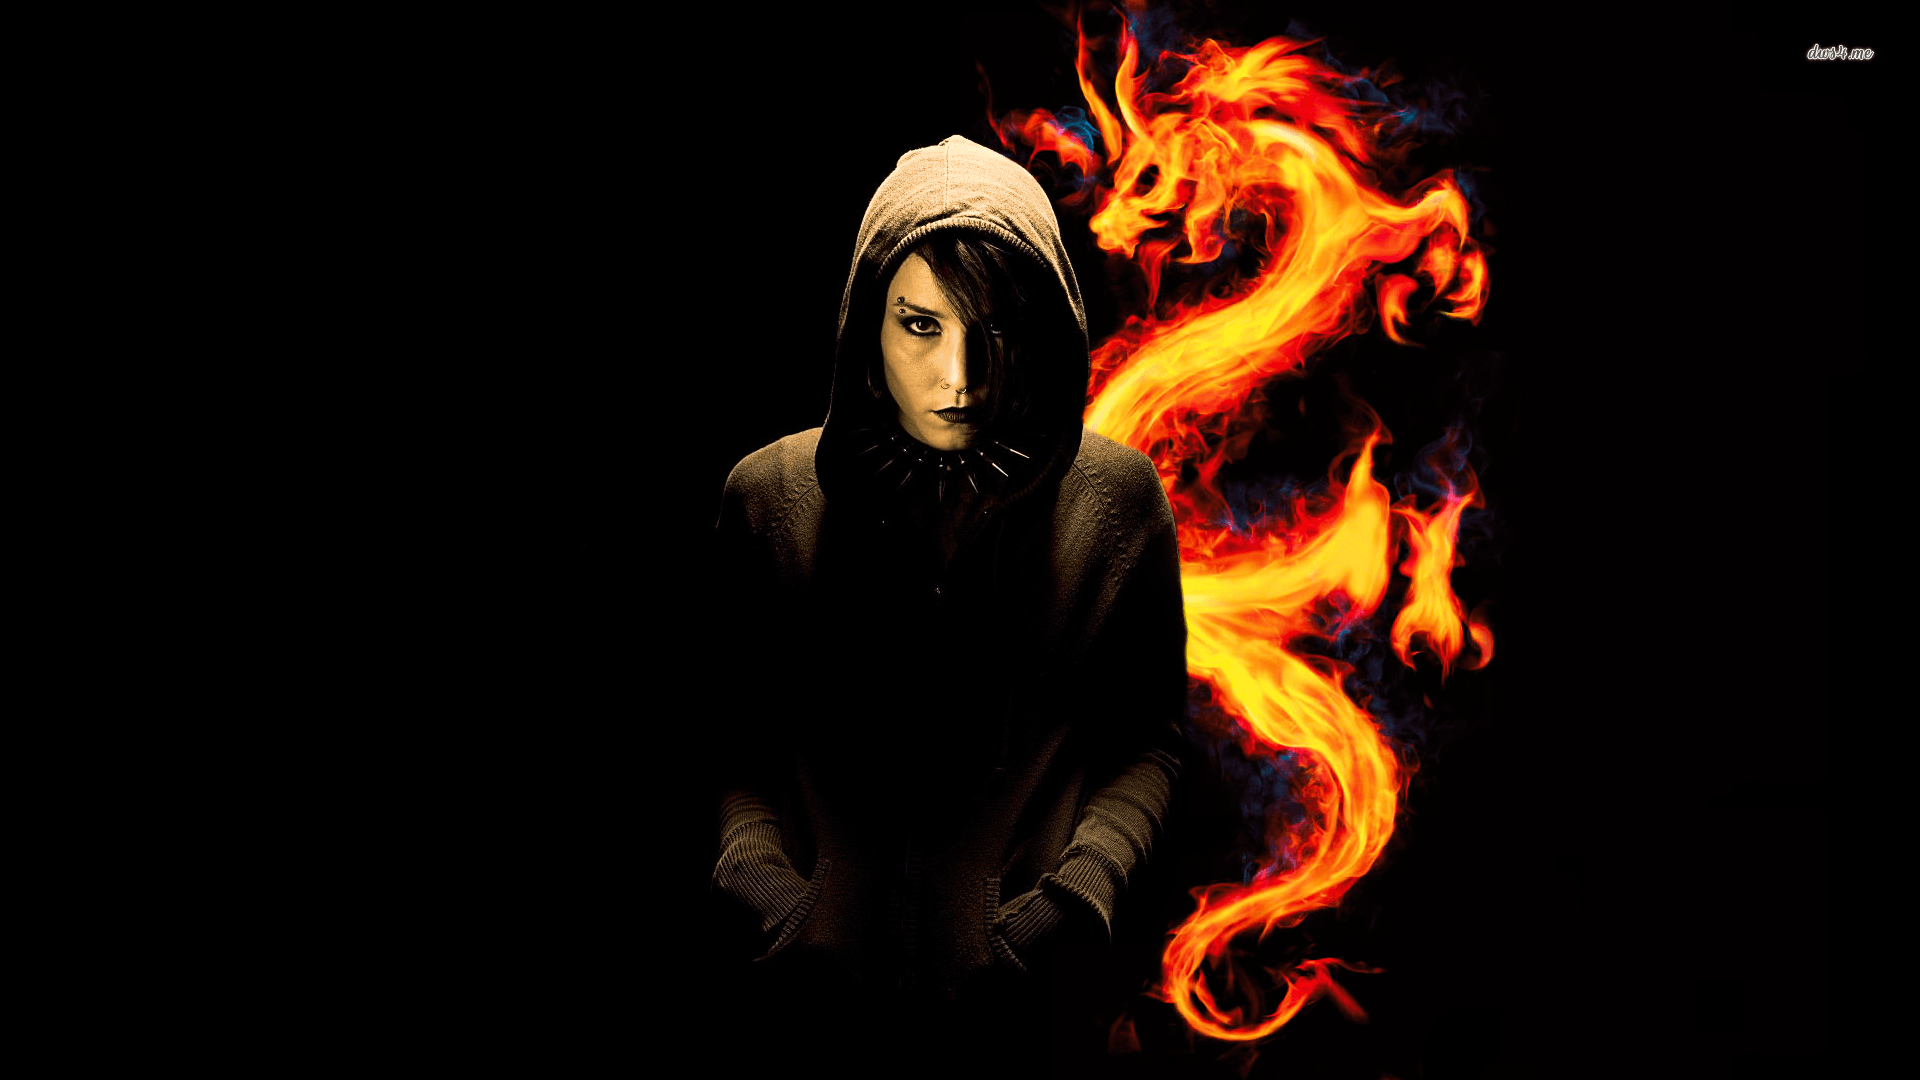 the girl who played with fire wallpaper